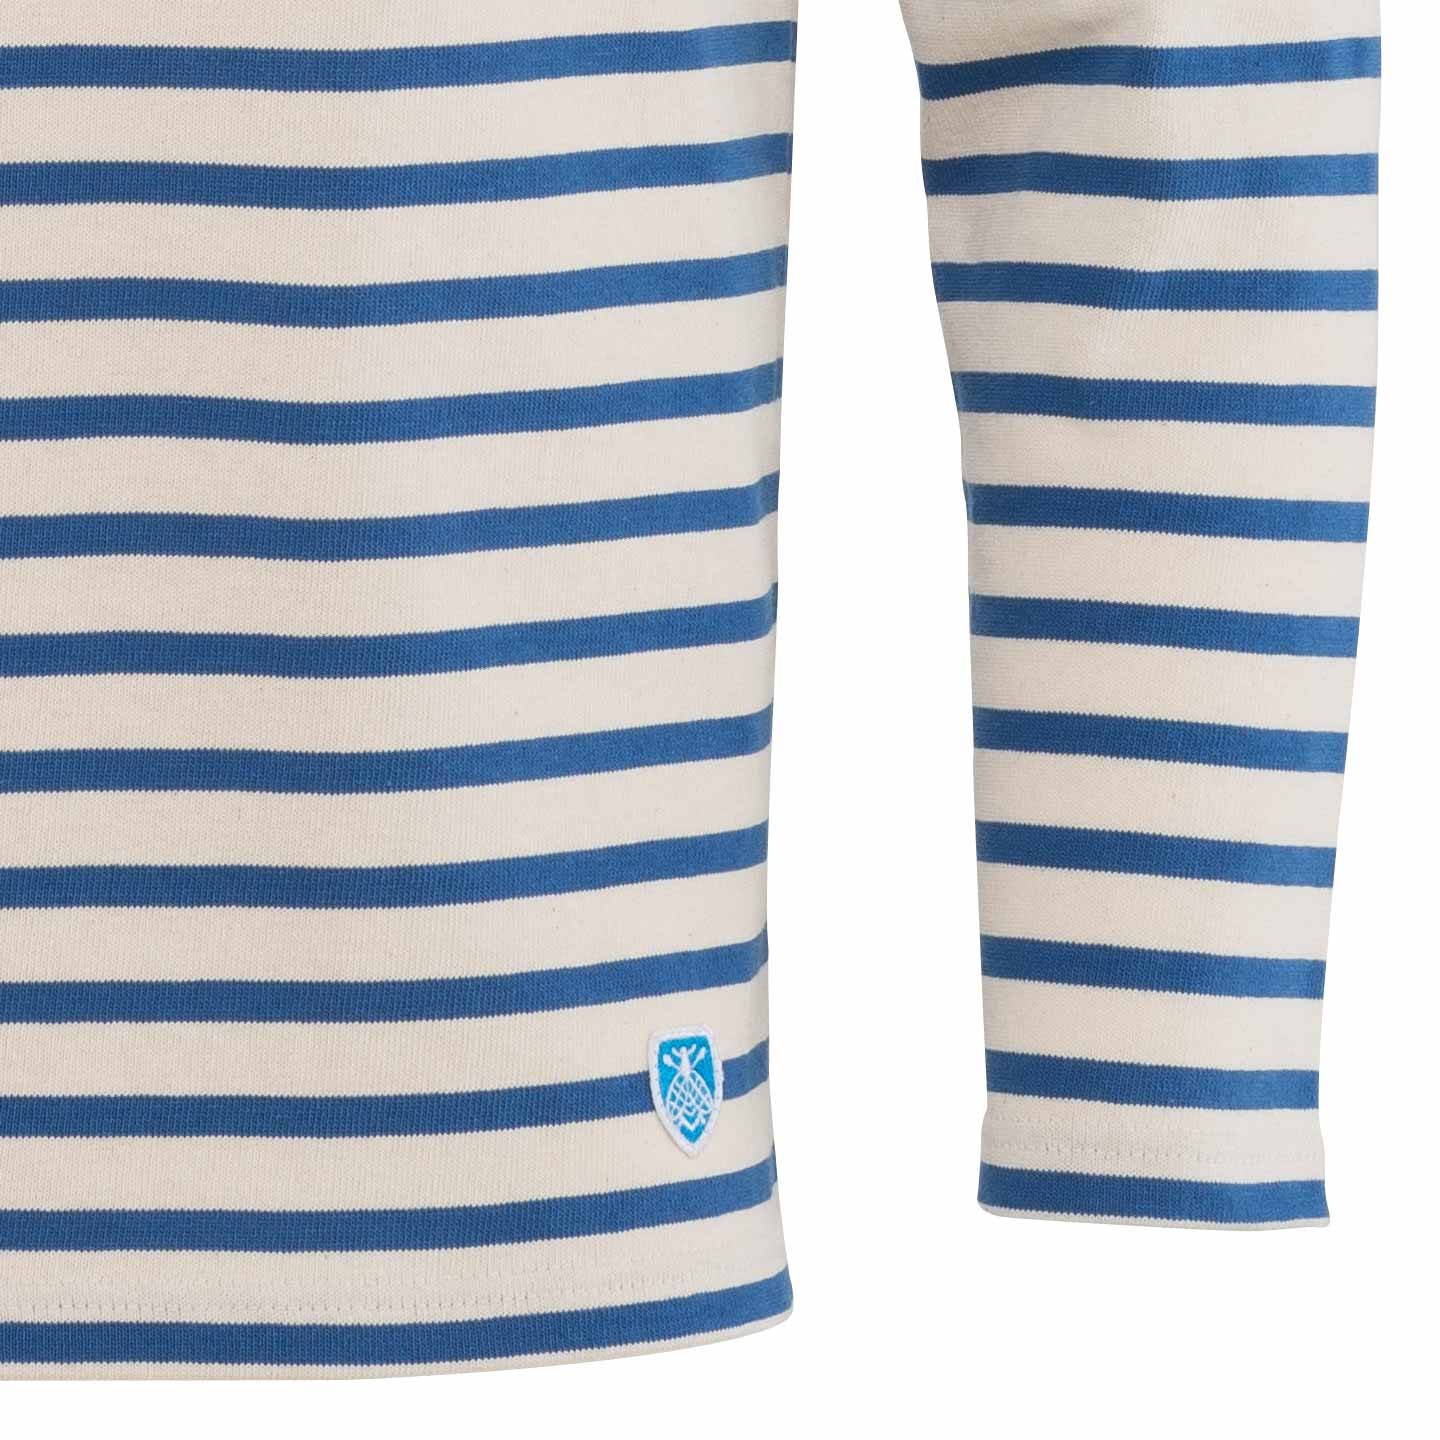 Striped shirt Écru / Indigo unisex 100% made in France Orcival